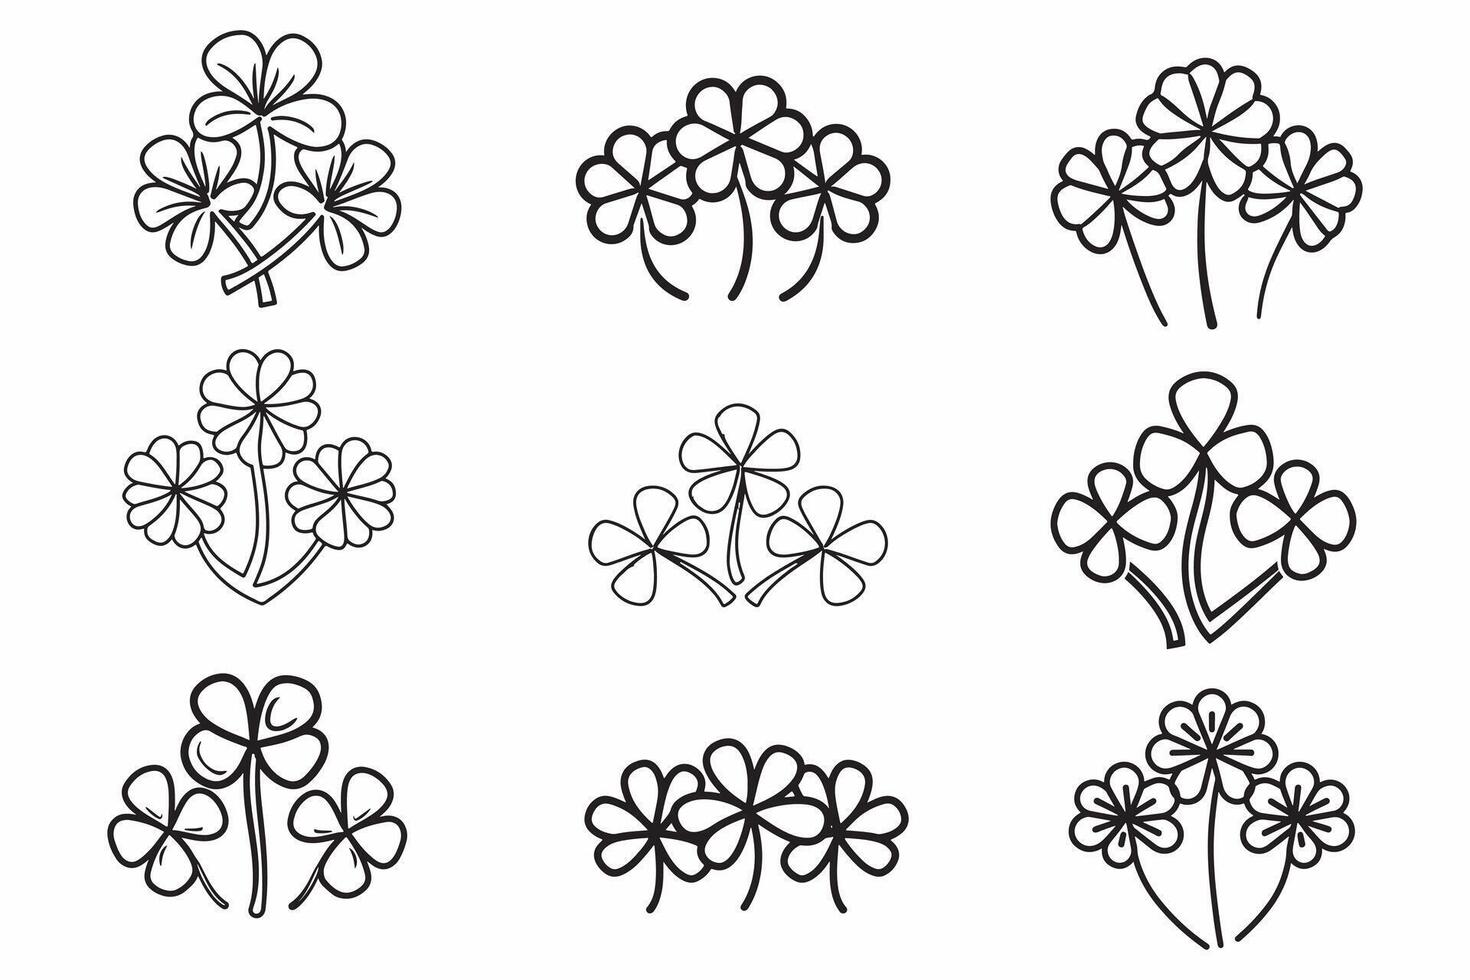 Clover With Three Flower Outline Vector Illustration On White Background